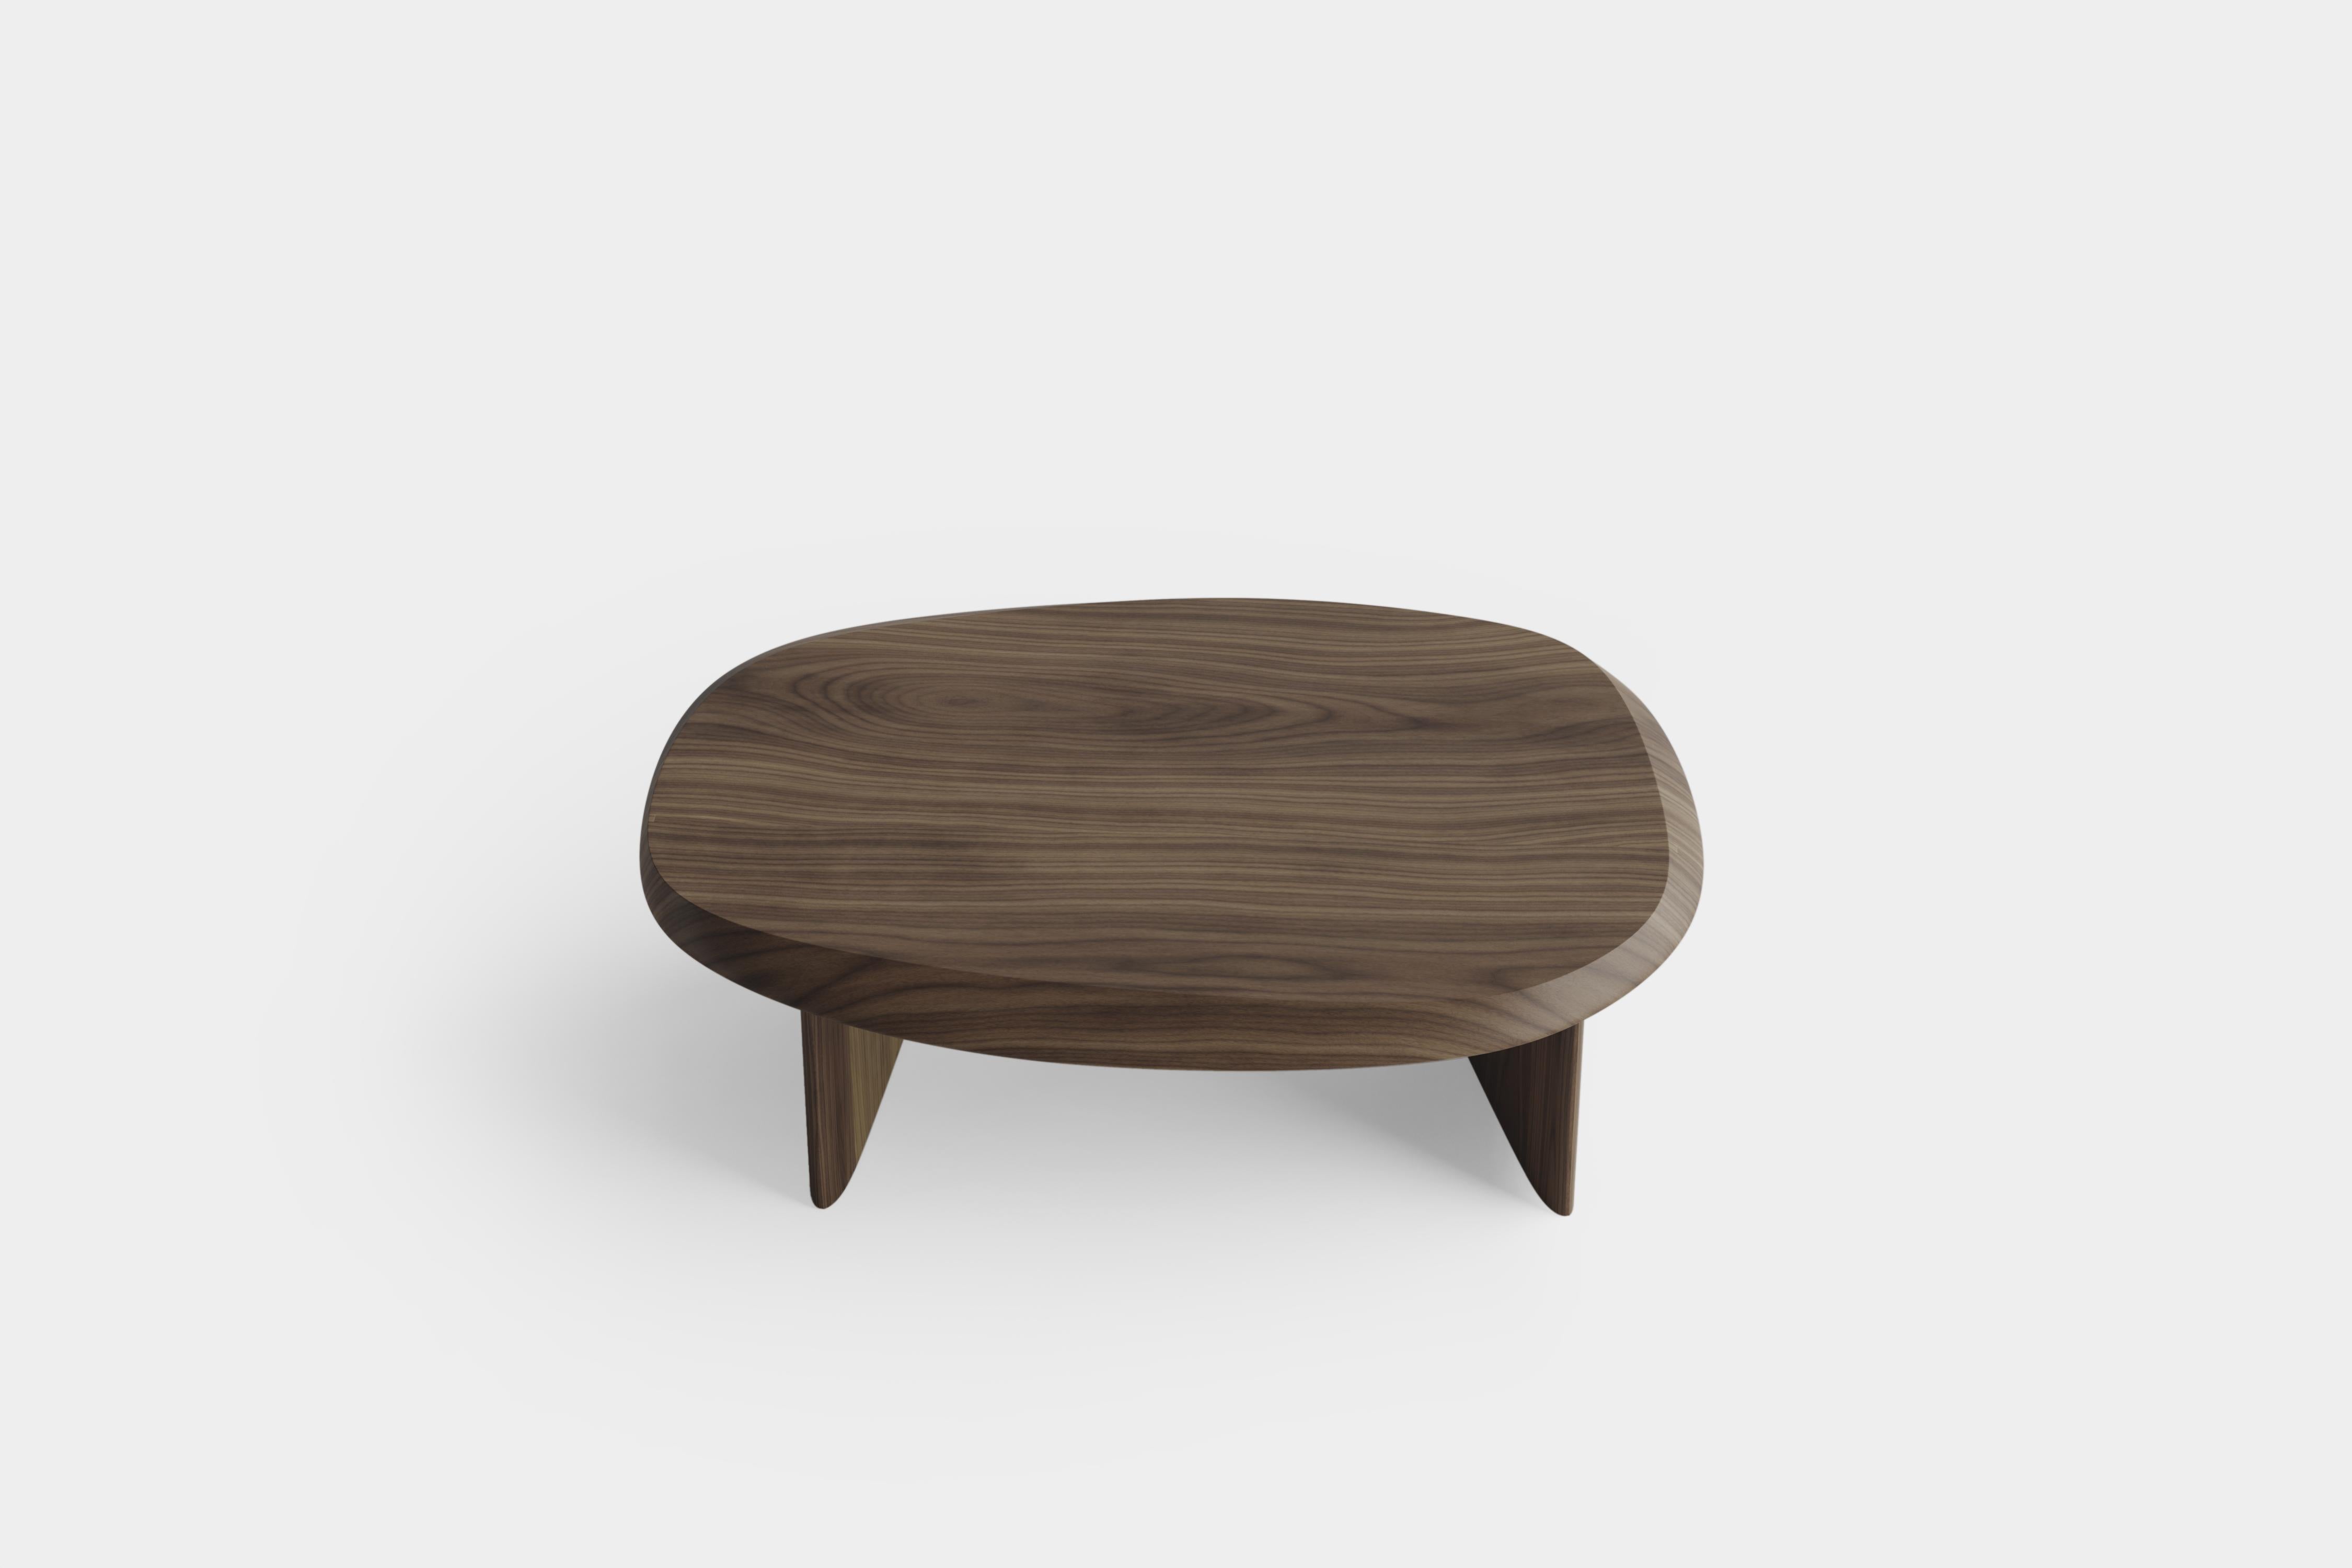 Set of 2 Duna Coffee Tables in Solid Walnut Wood, Coffee Table by Joel Escalona For Sale 5